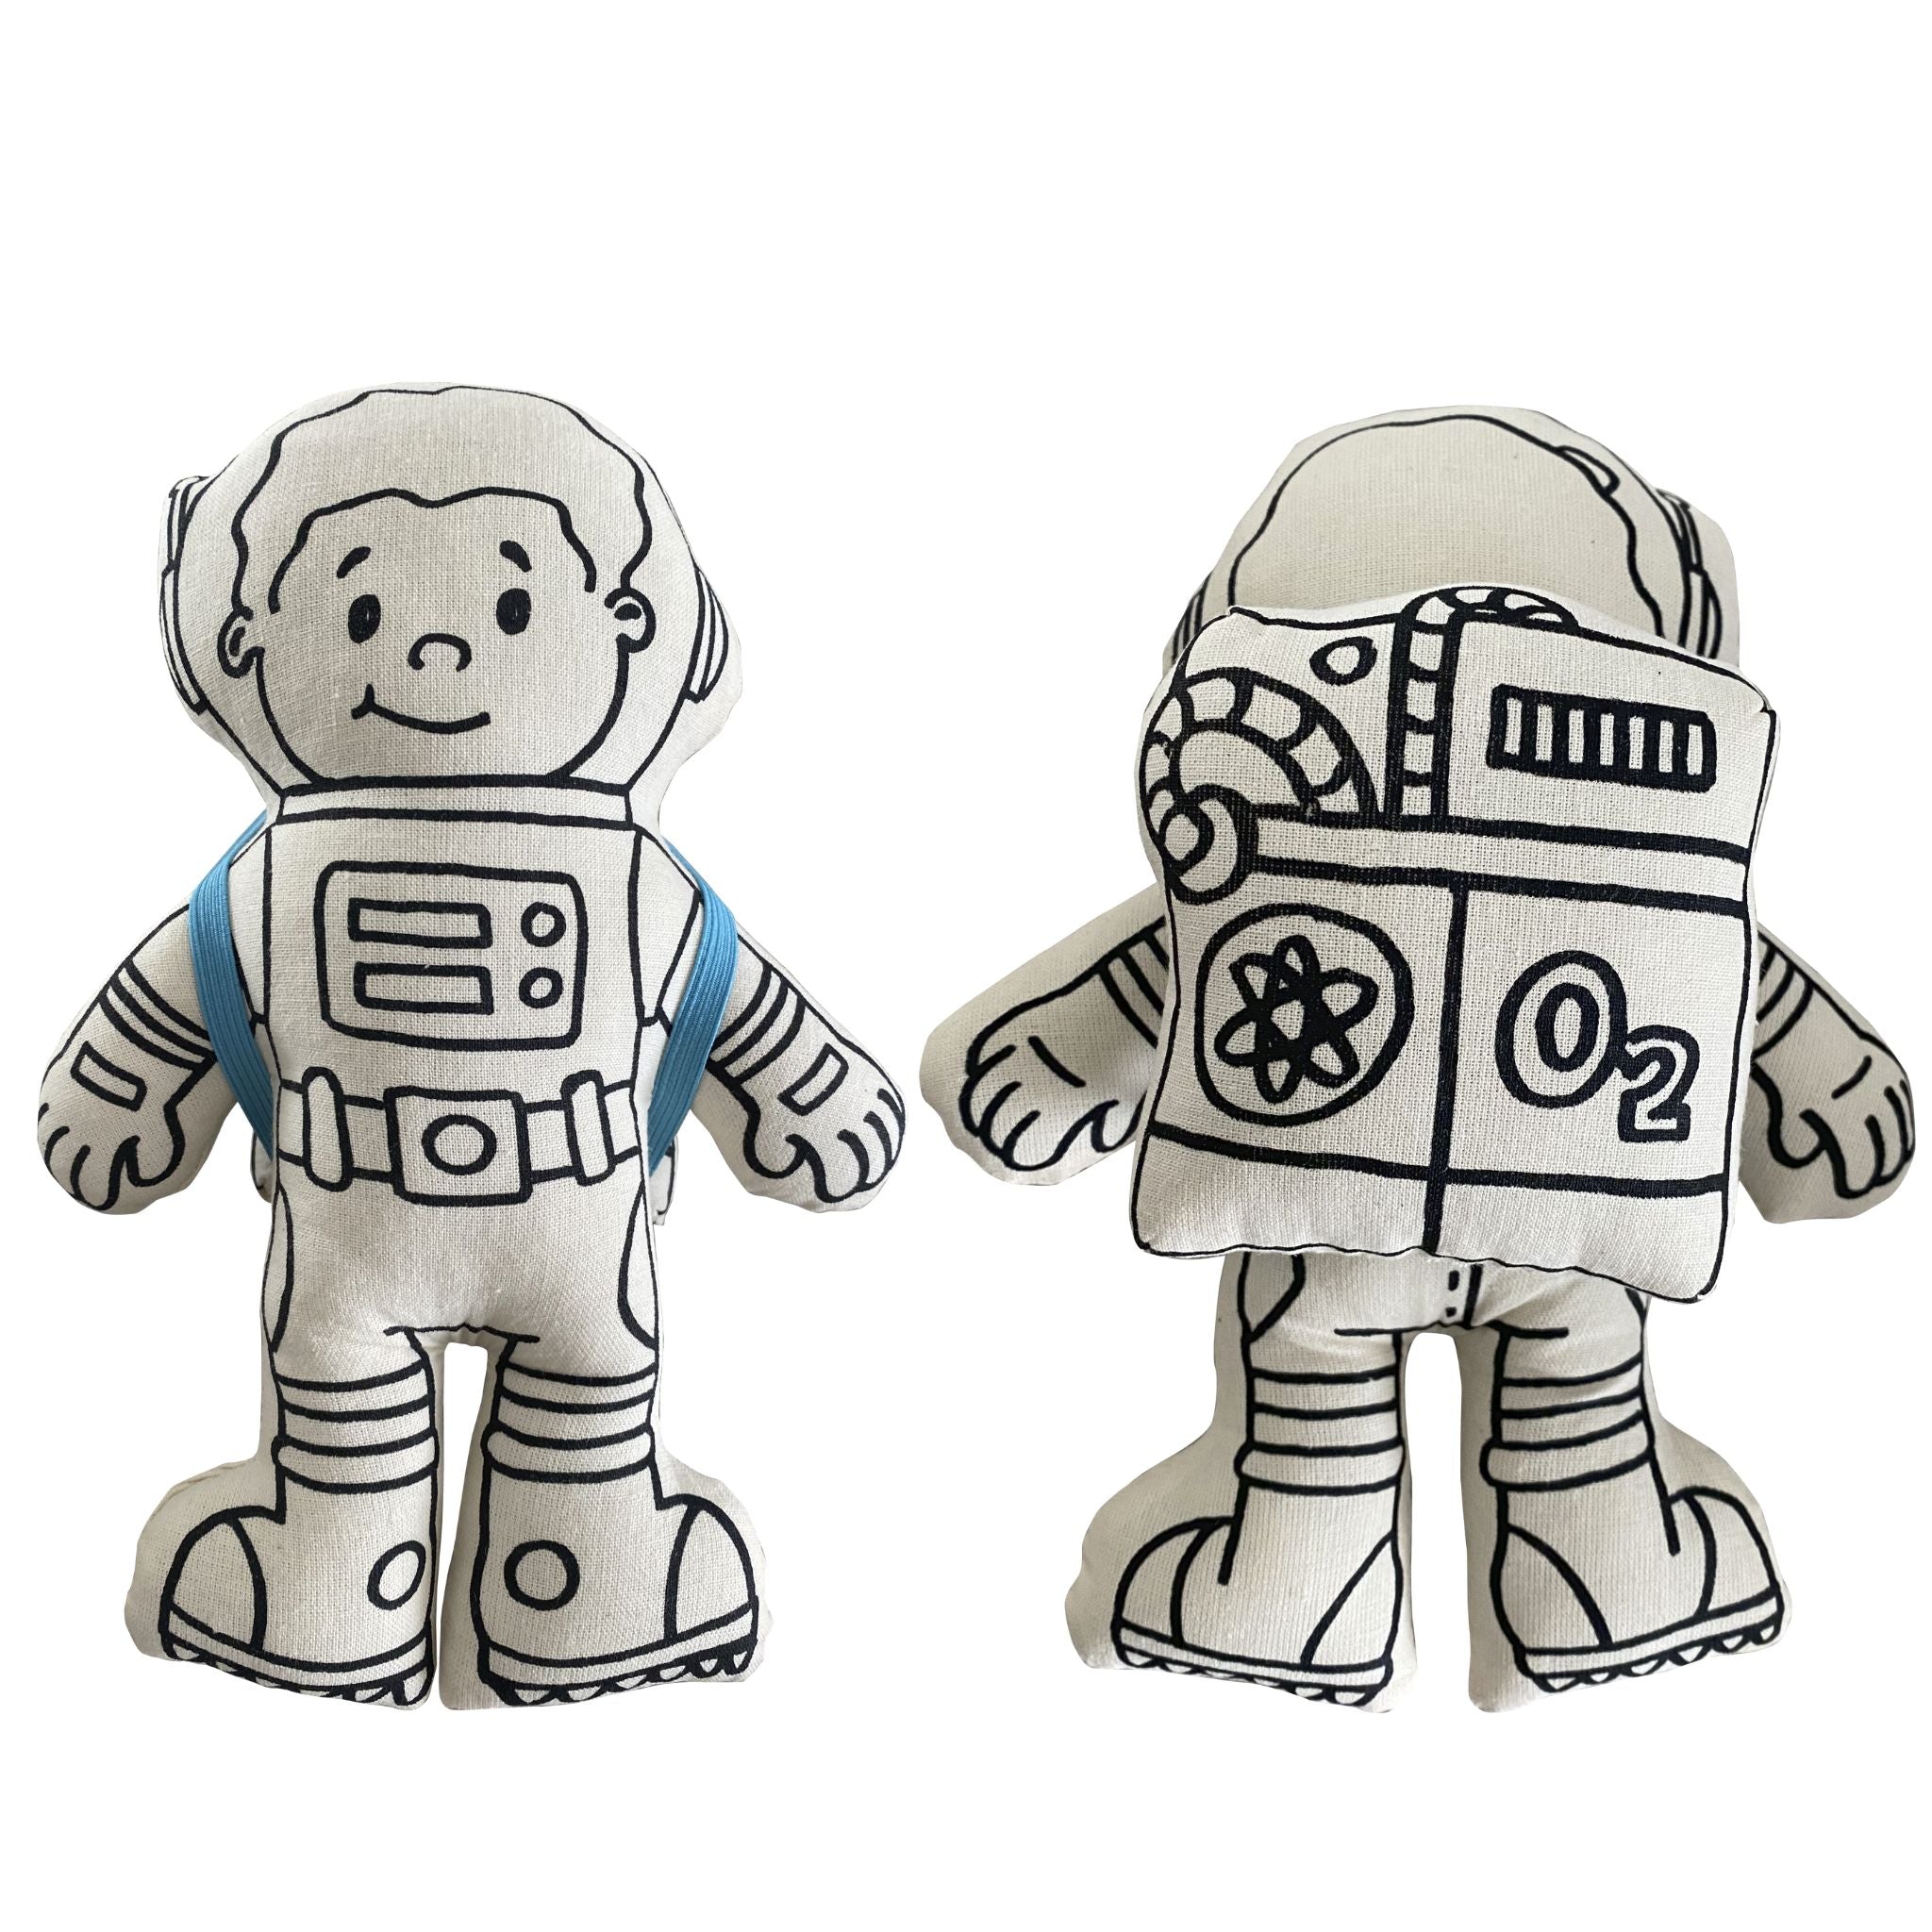 Astronaut Doll with Short Hair + Backpack